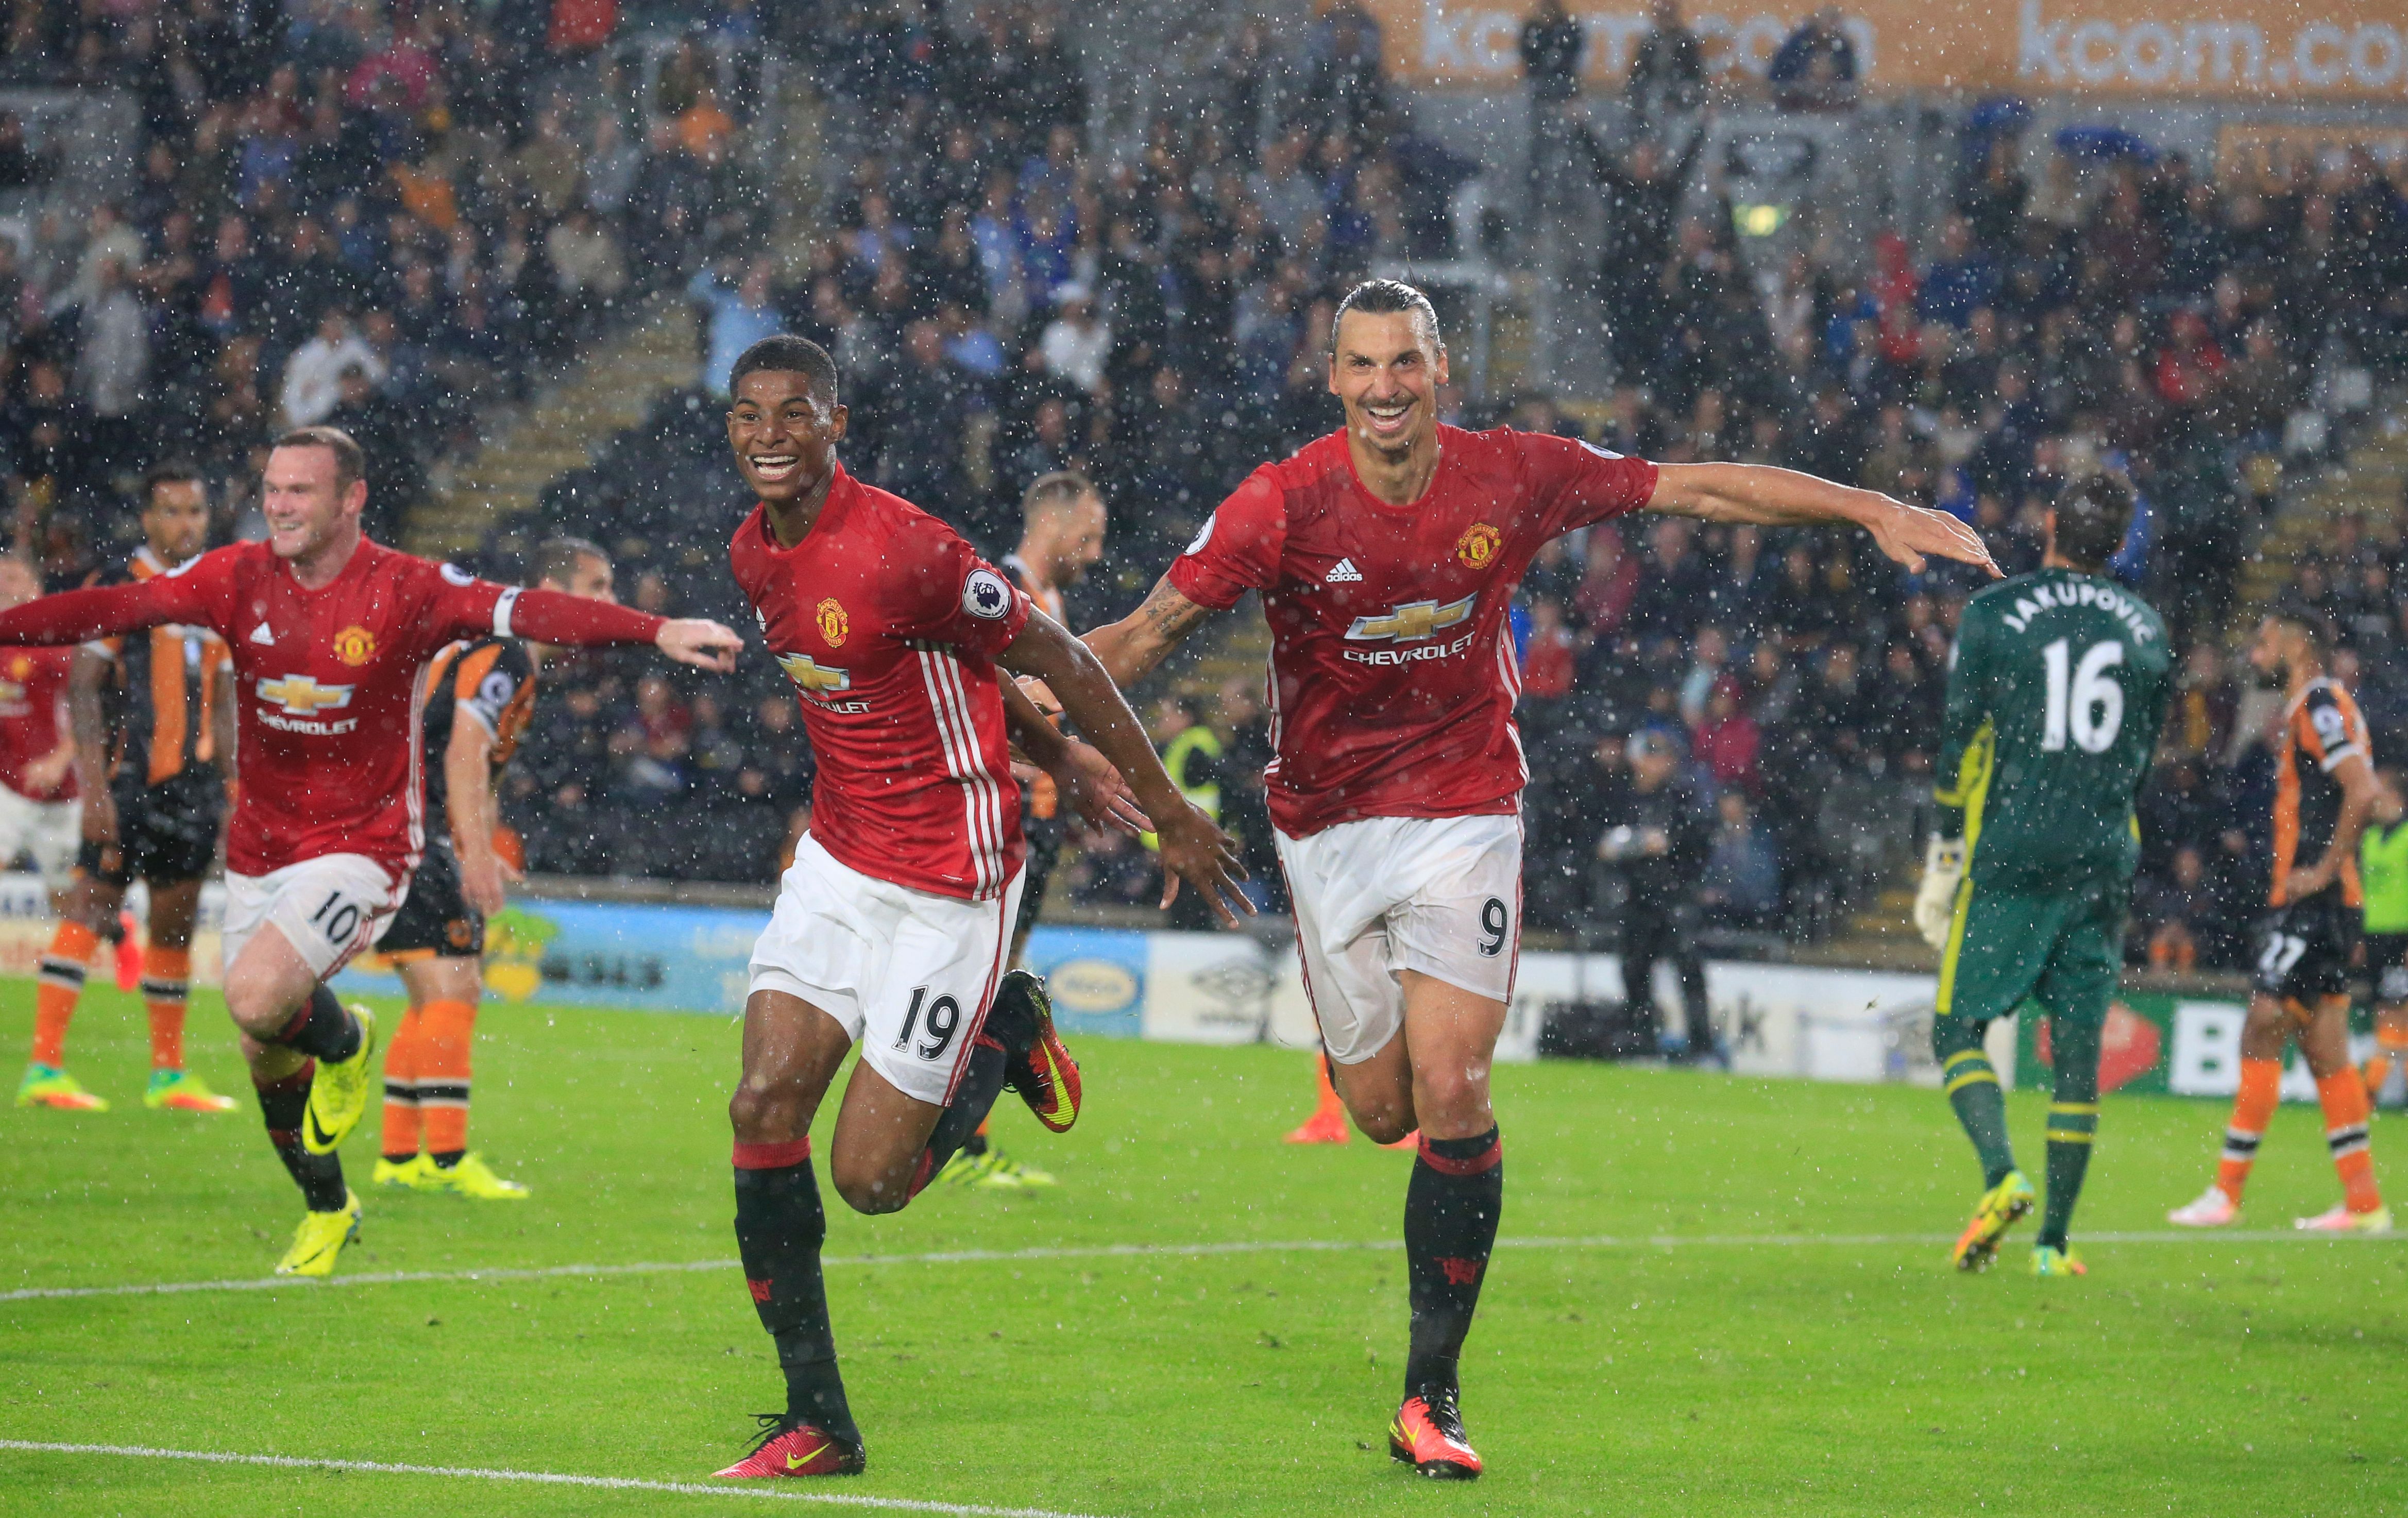 Manchester United's English striker Marcus Rashford (2nd L) celebrates with Manchester United's Swedish striker Zlatan Ibrahimovic after scoring their late winning goal during the English Premier League football match between Hull City and Manchester United at the KCOM Stadium in Kingston upon Hull, north east England on August 27, 2016.
Manchester united won the game 1-0. / AFP / Lindsey PARNABY / RESTRICTED TO EDITORIAL USE. No use with unauthorized audio, video, data, fixture lists, club/league logos or 'live' services. Online in-match use limited to 75 images, no video emulation. No use in betting, games or single club/league/player publications.  /         (Photo credit should read LINDSEY PARNABY/AFP/Getty Images)